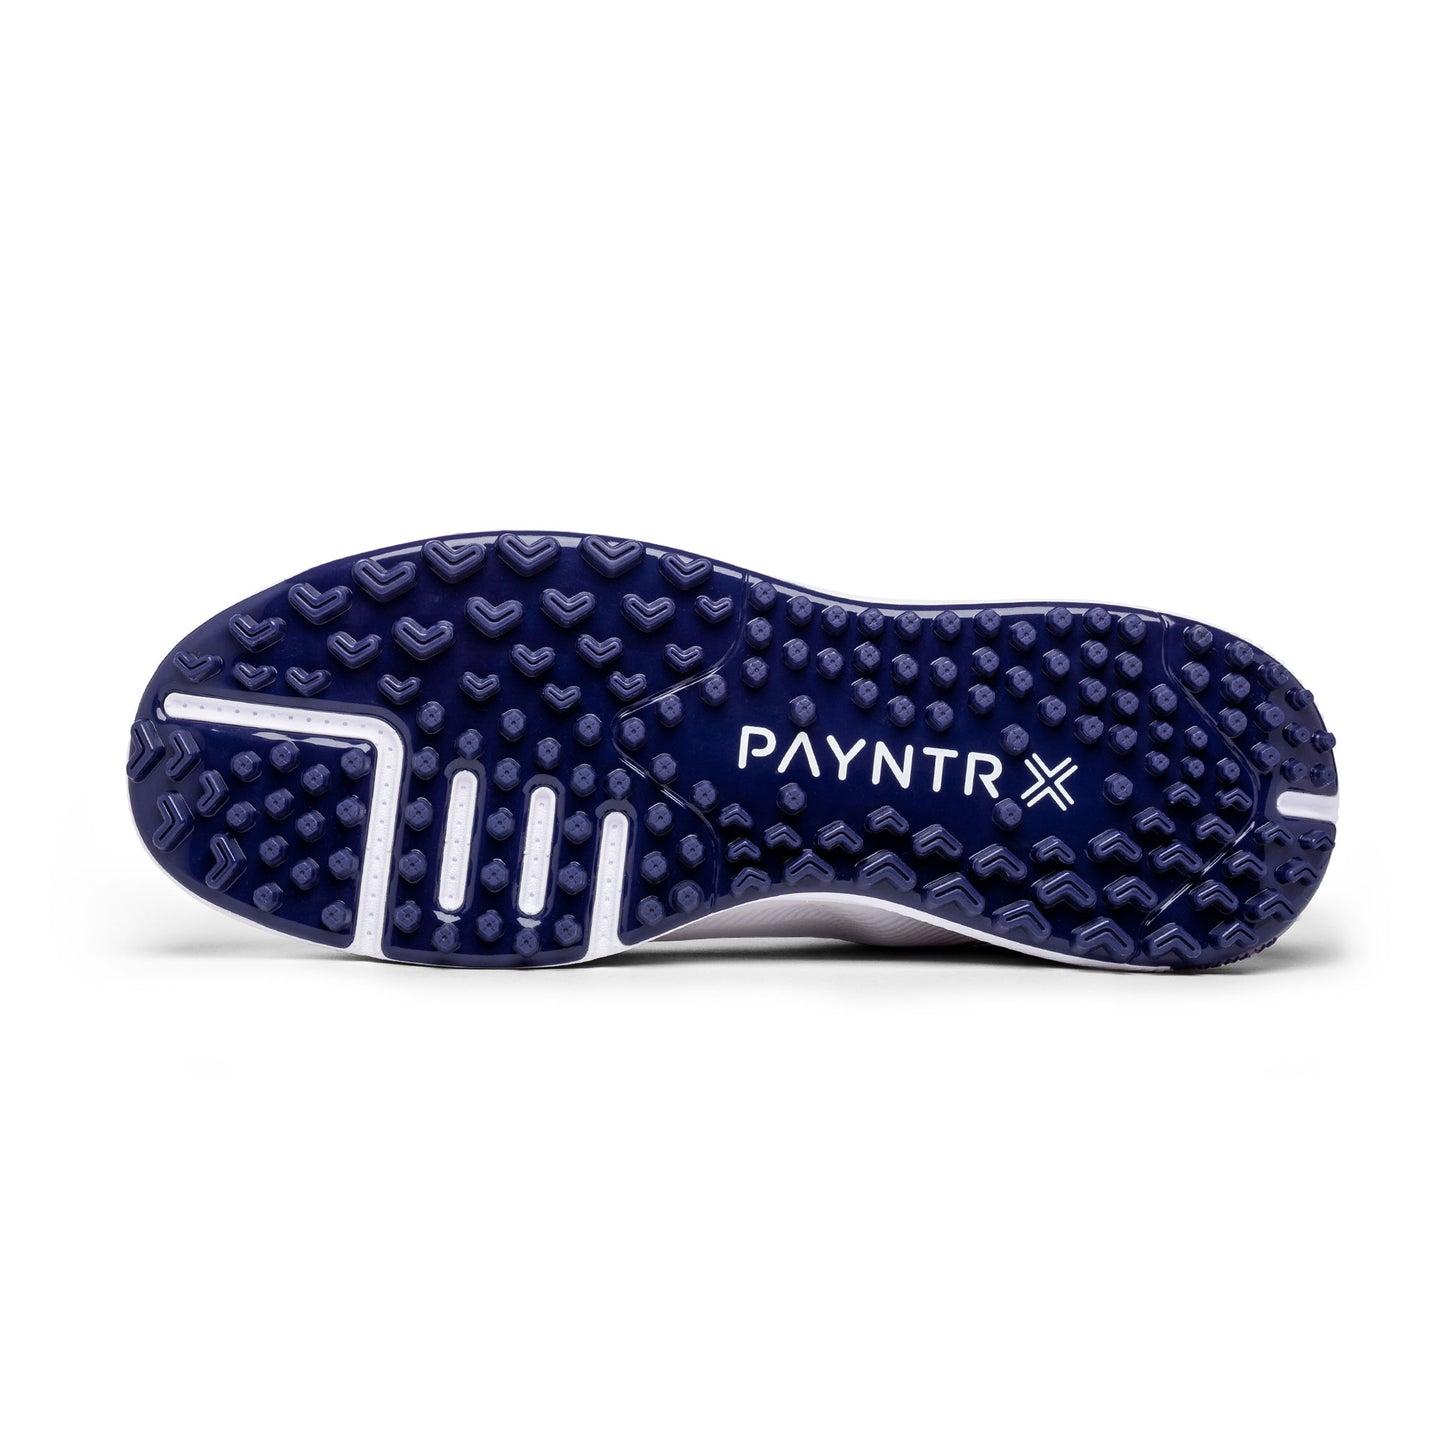 PAYNTR X-003 F Spikeless Golf Shoes (White/Navy) - Sole